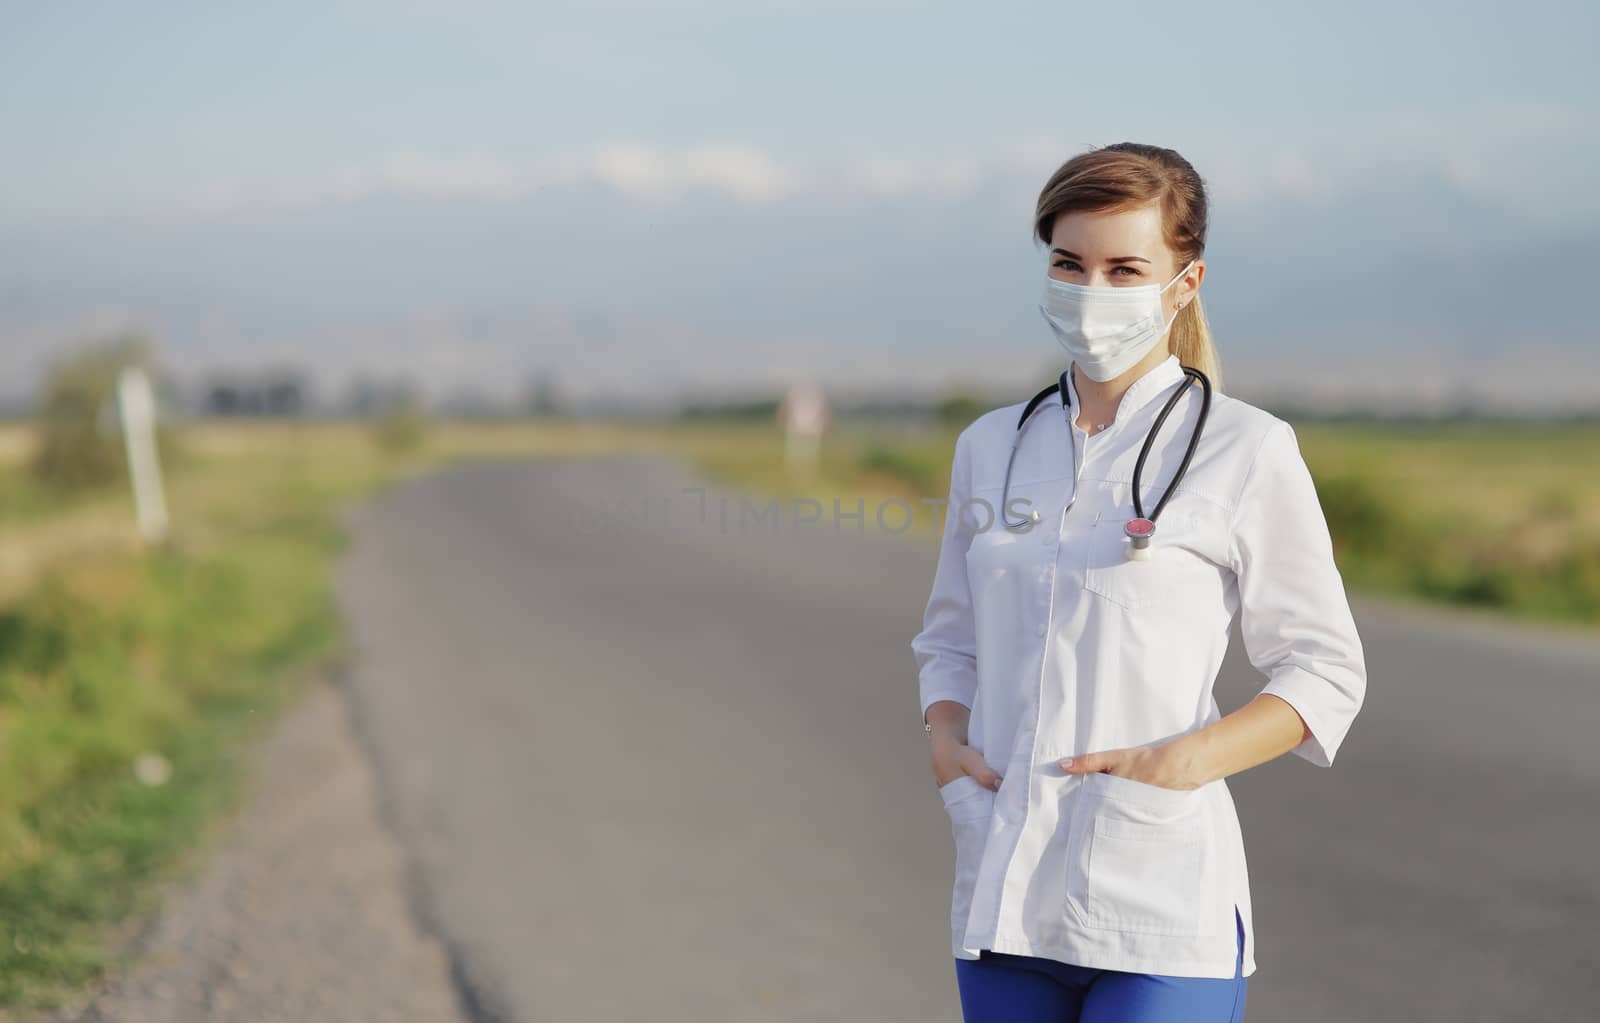 Female doctor or nurse wearing a protective face mask next to a rural road. Safety measures against the coronavirus. Prevention Covid-19 healthcare concept. Stethoscope over the neck. Woman, girl.